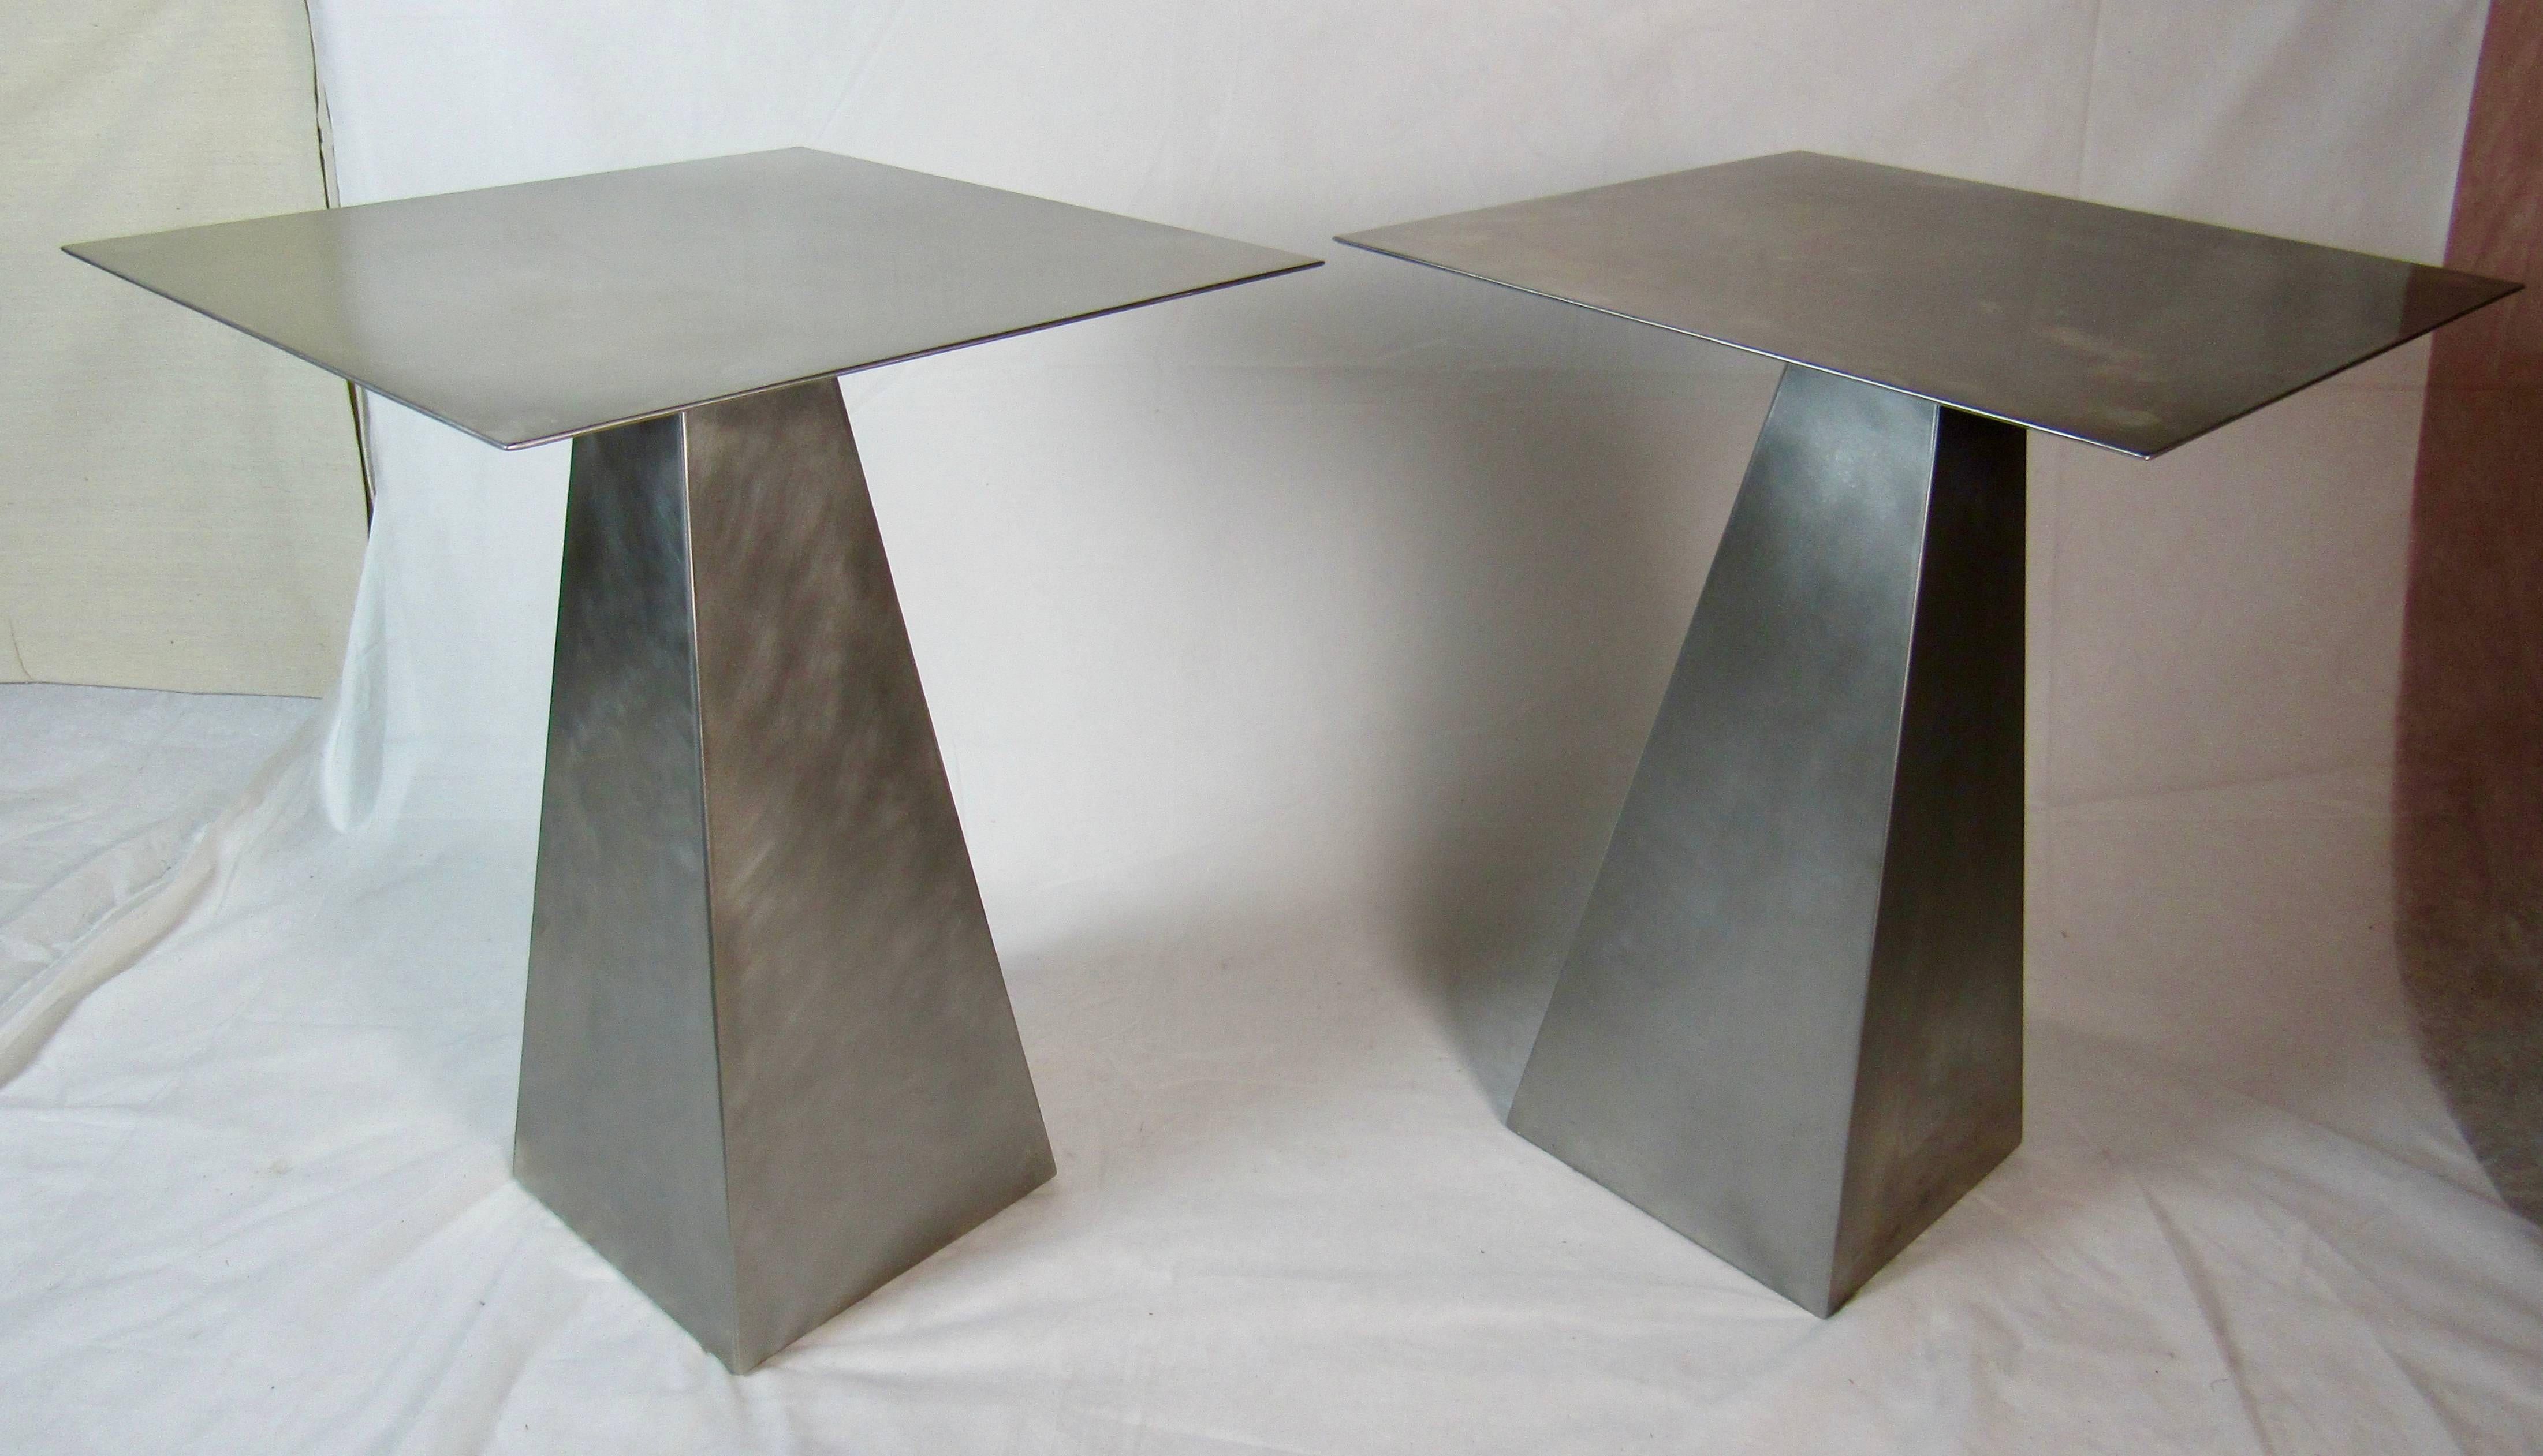 A pair of brushed stainless steel end tables that resemble Harvey Probber's pyramid based side tables. I was told the tables date from the 1980s.
They are in excellent vintage condition.